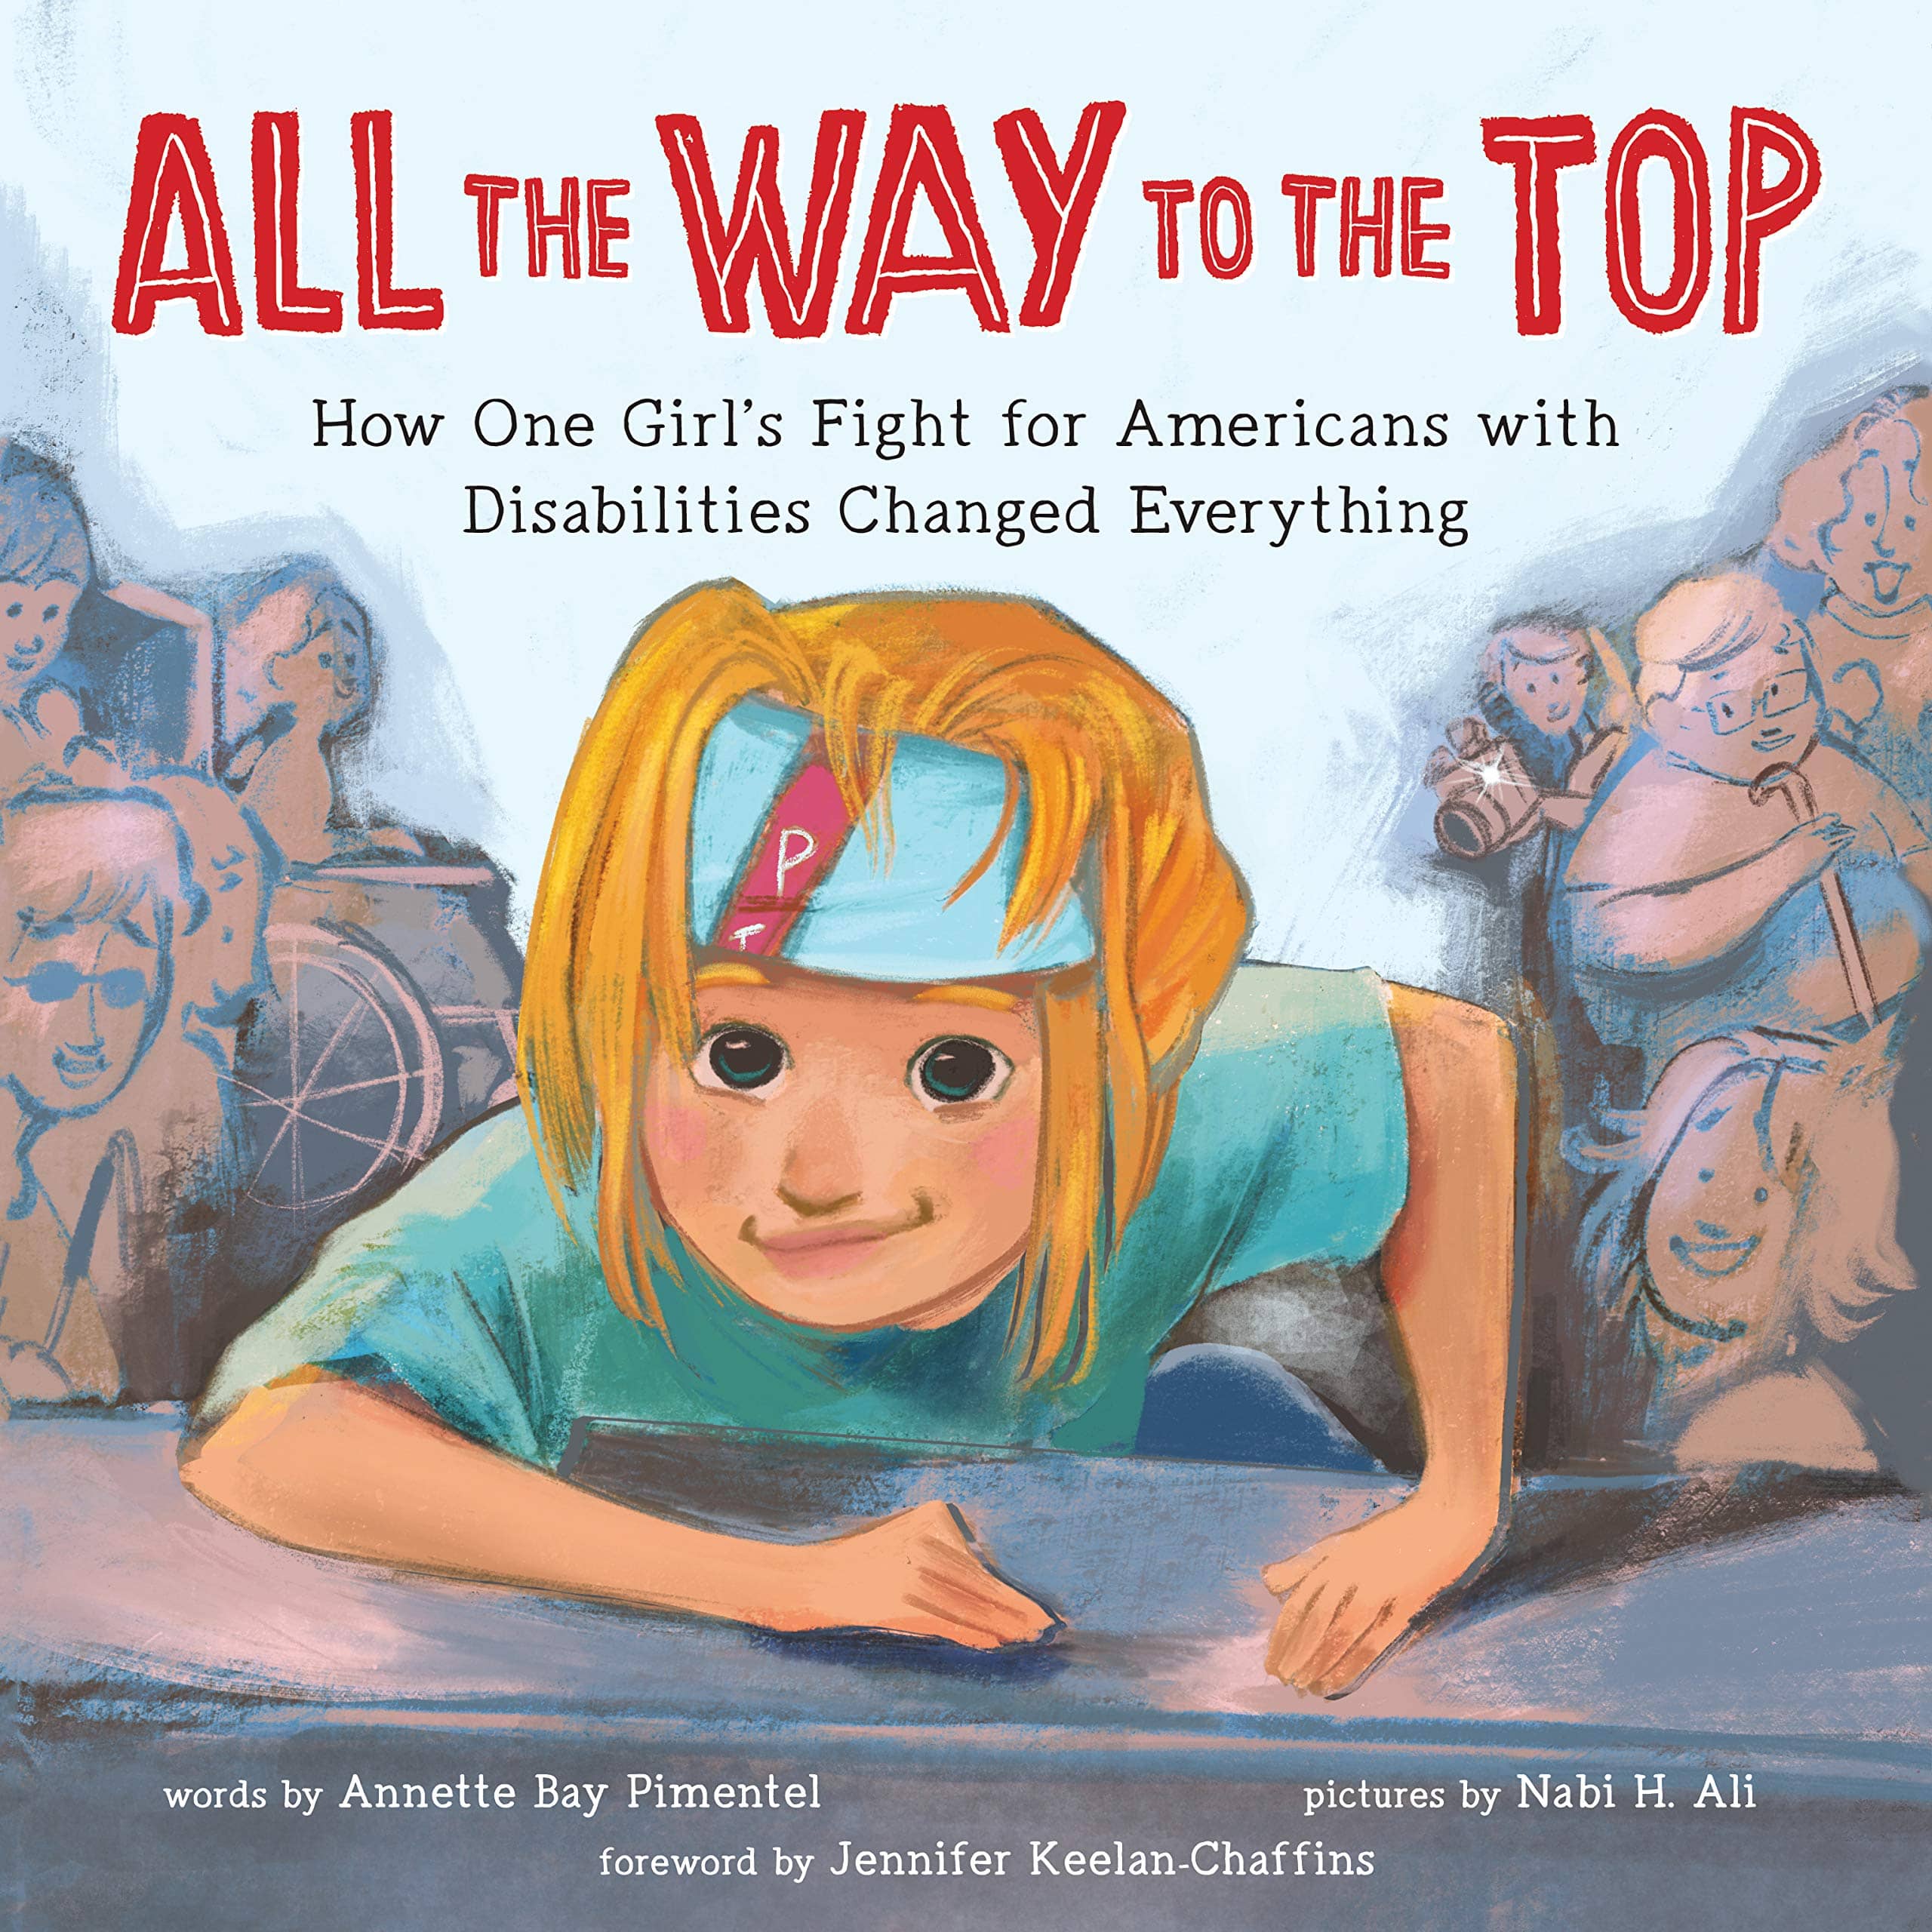 All the Way to the Top: How One Girl’s Fight for Americans with Disabilities Changed Everything book cover